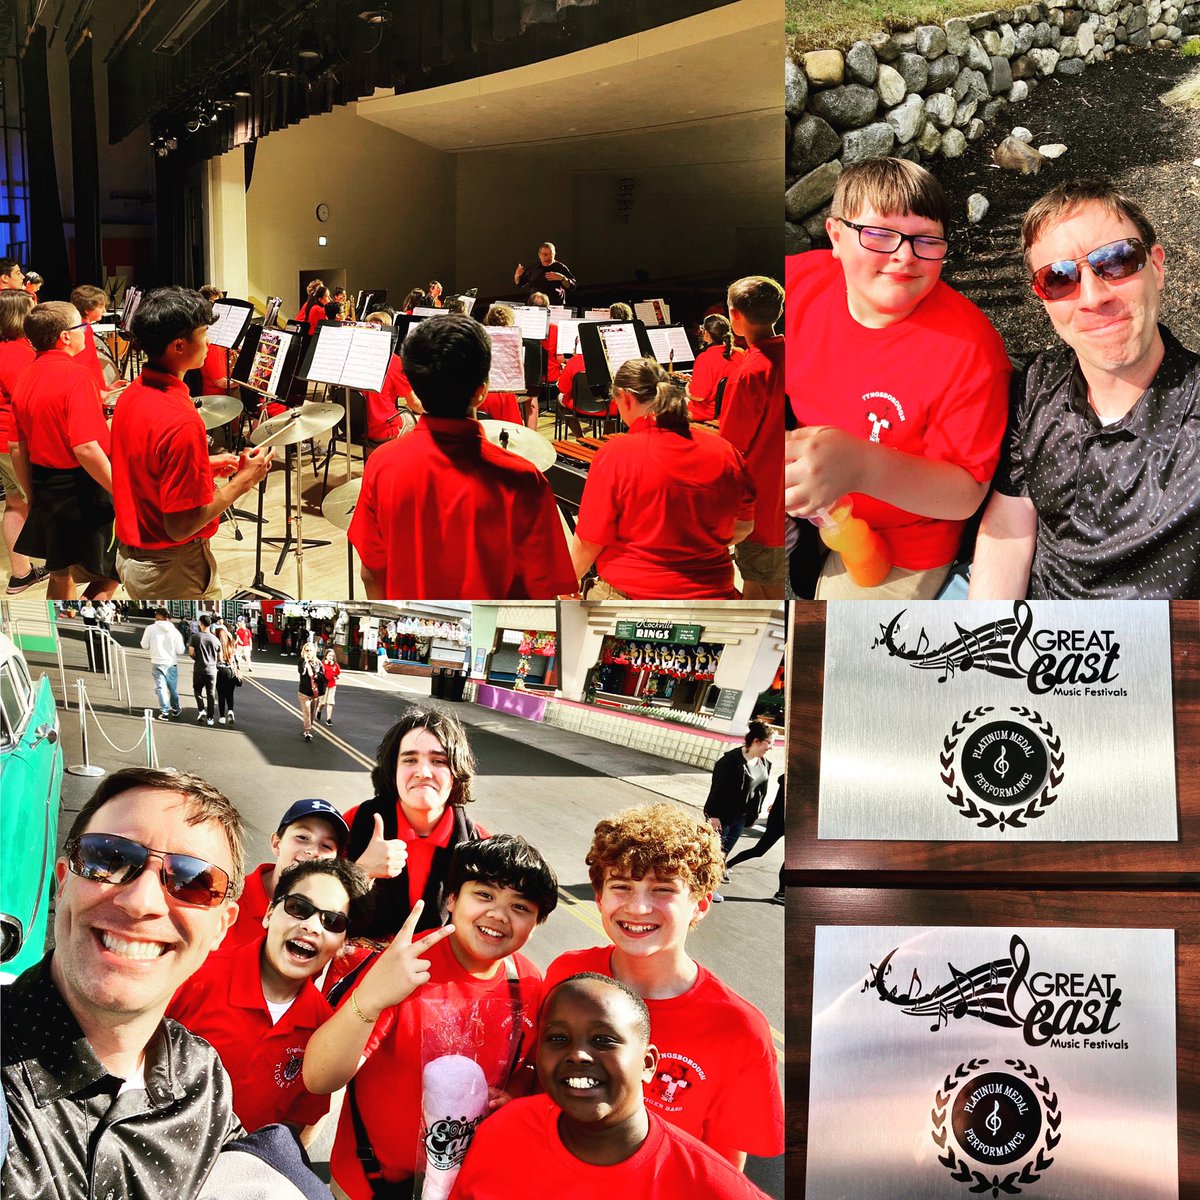 Congratulations to the Tyngsborough Public Schools Grade 7-12 Band & Grade 6 Band! Both groups were awarded a Platinum Medal—the highest award given—at Friday’s Great East Music Festival. #tpsprepares #tyngsboro @TyngsboroughPS